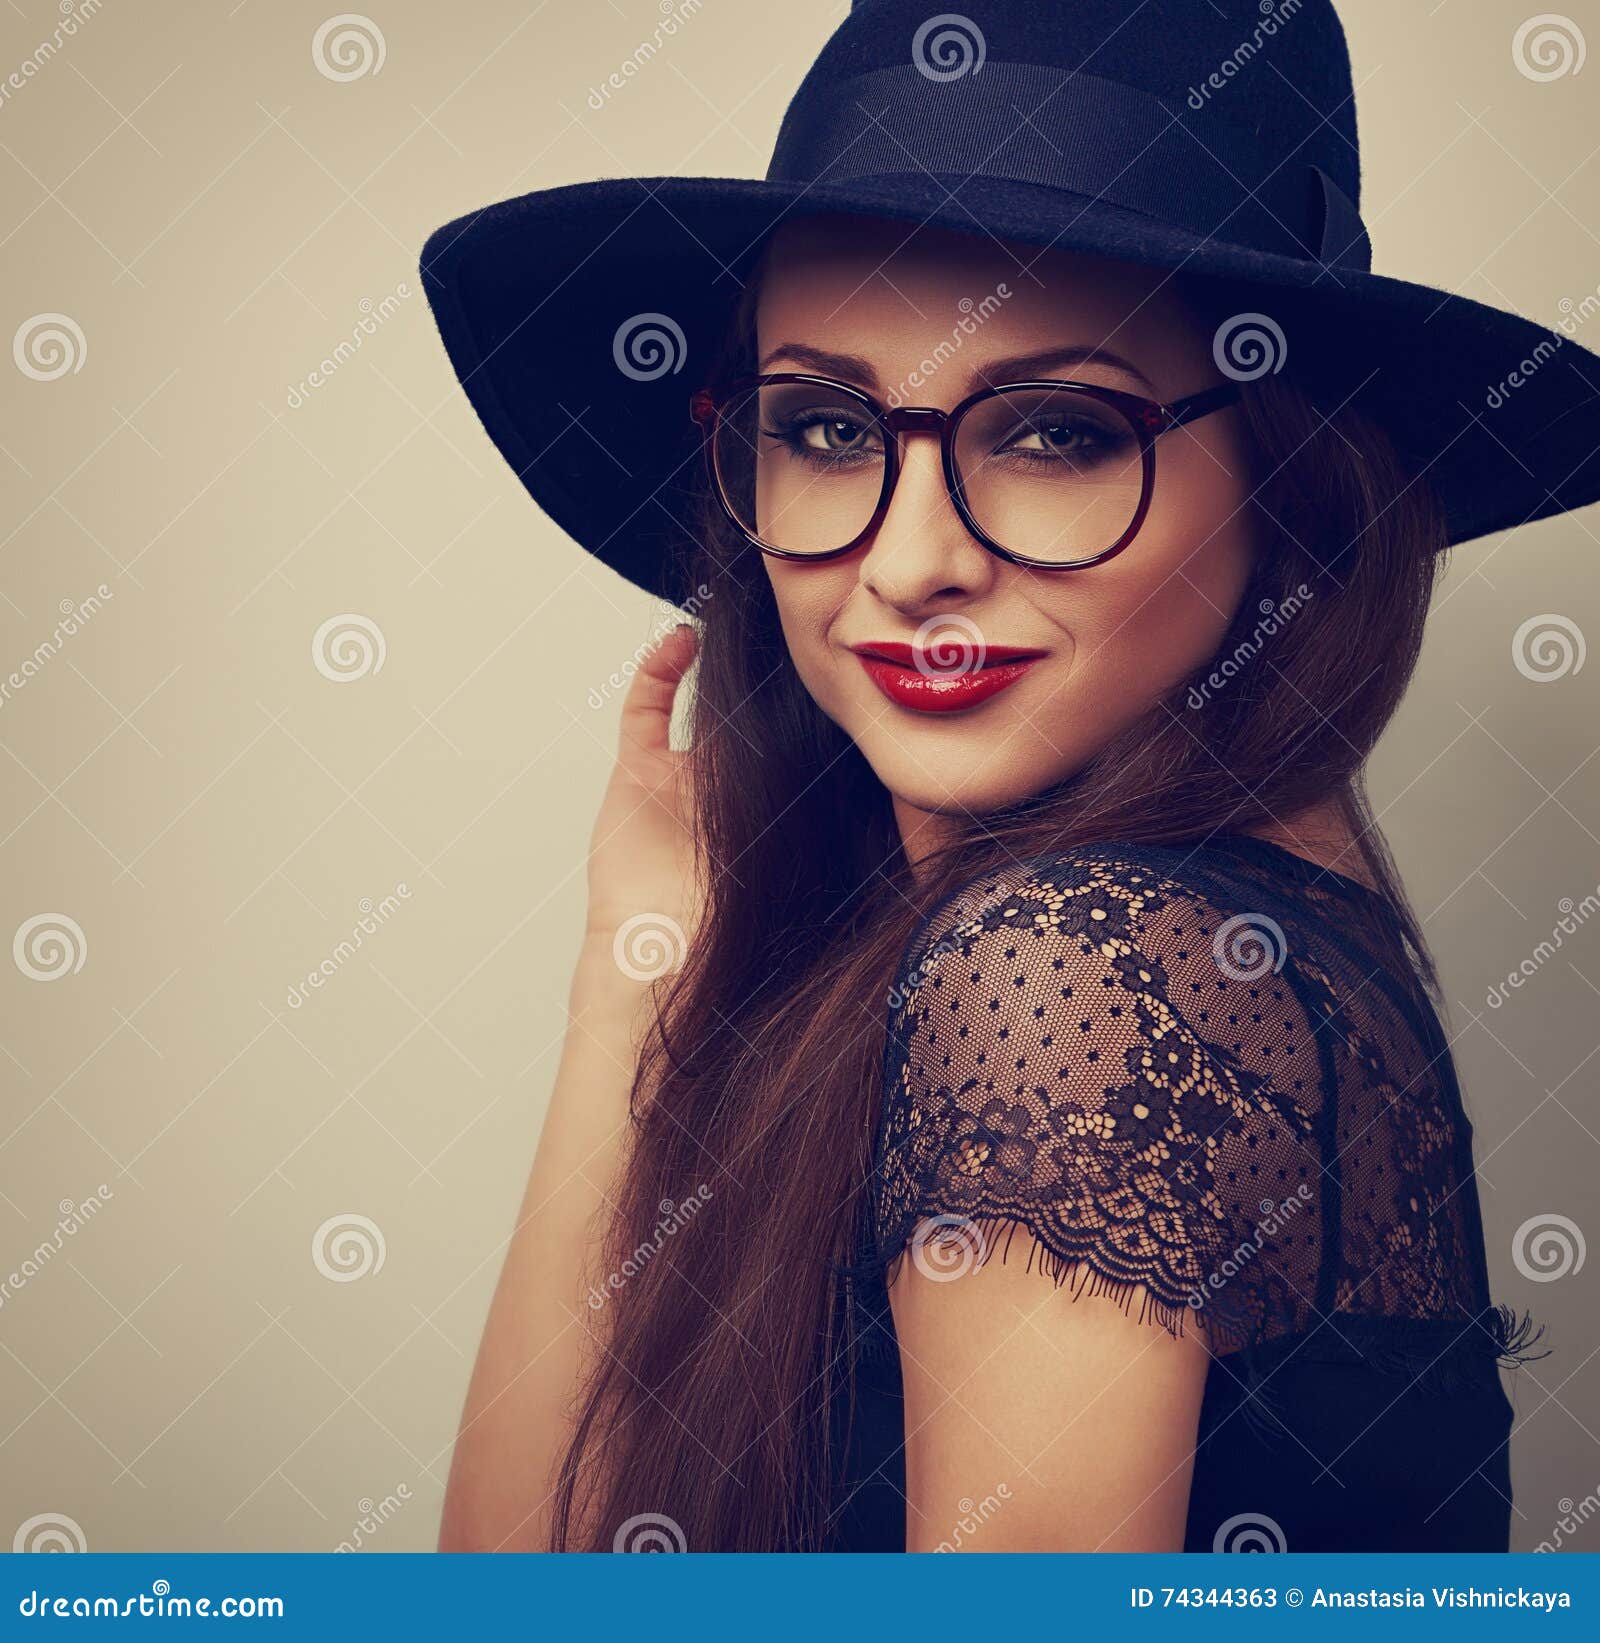 Beautiful Makeup Woman in Fashion Black Hat and Eyeglasses Looking with ...